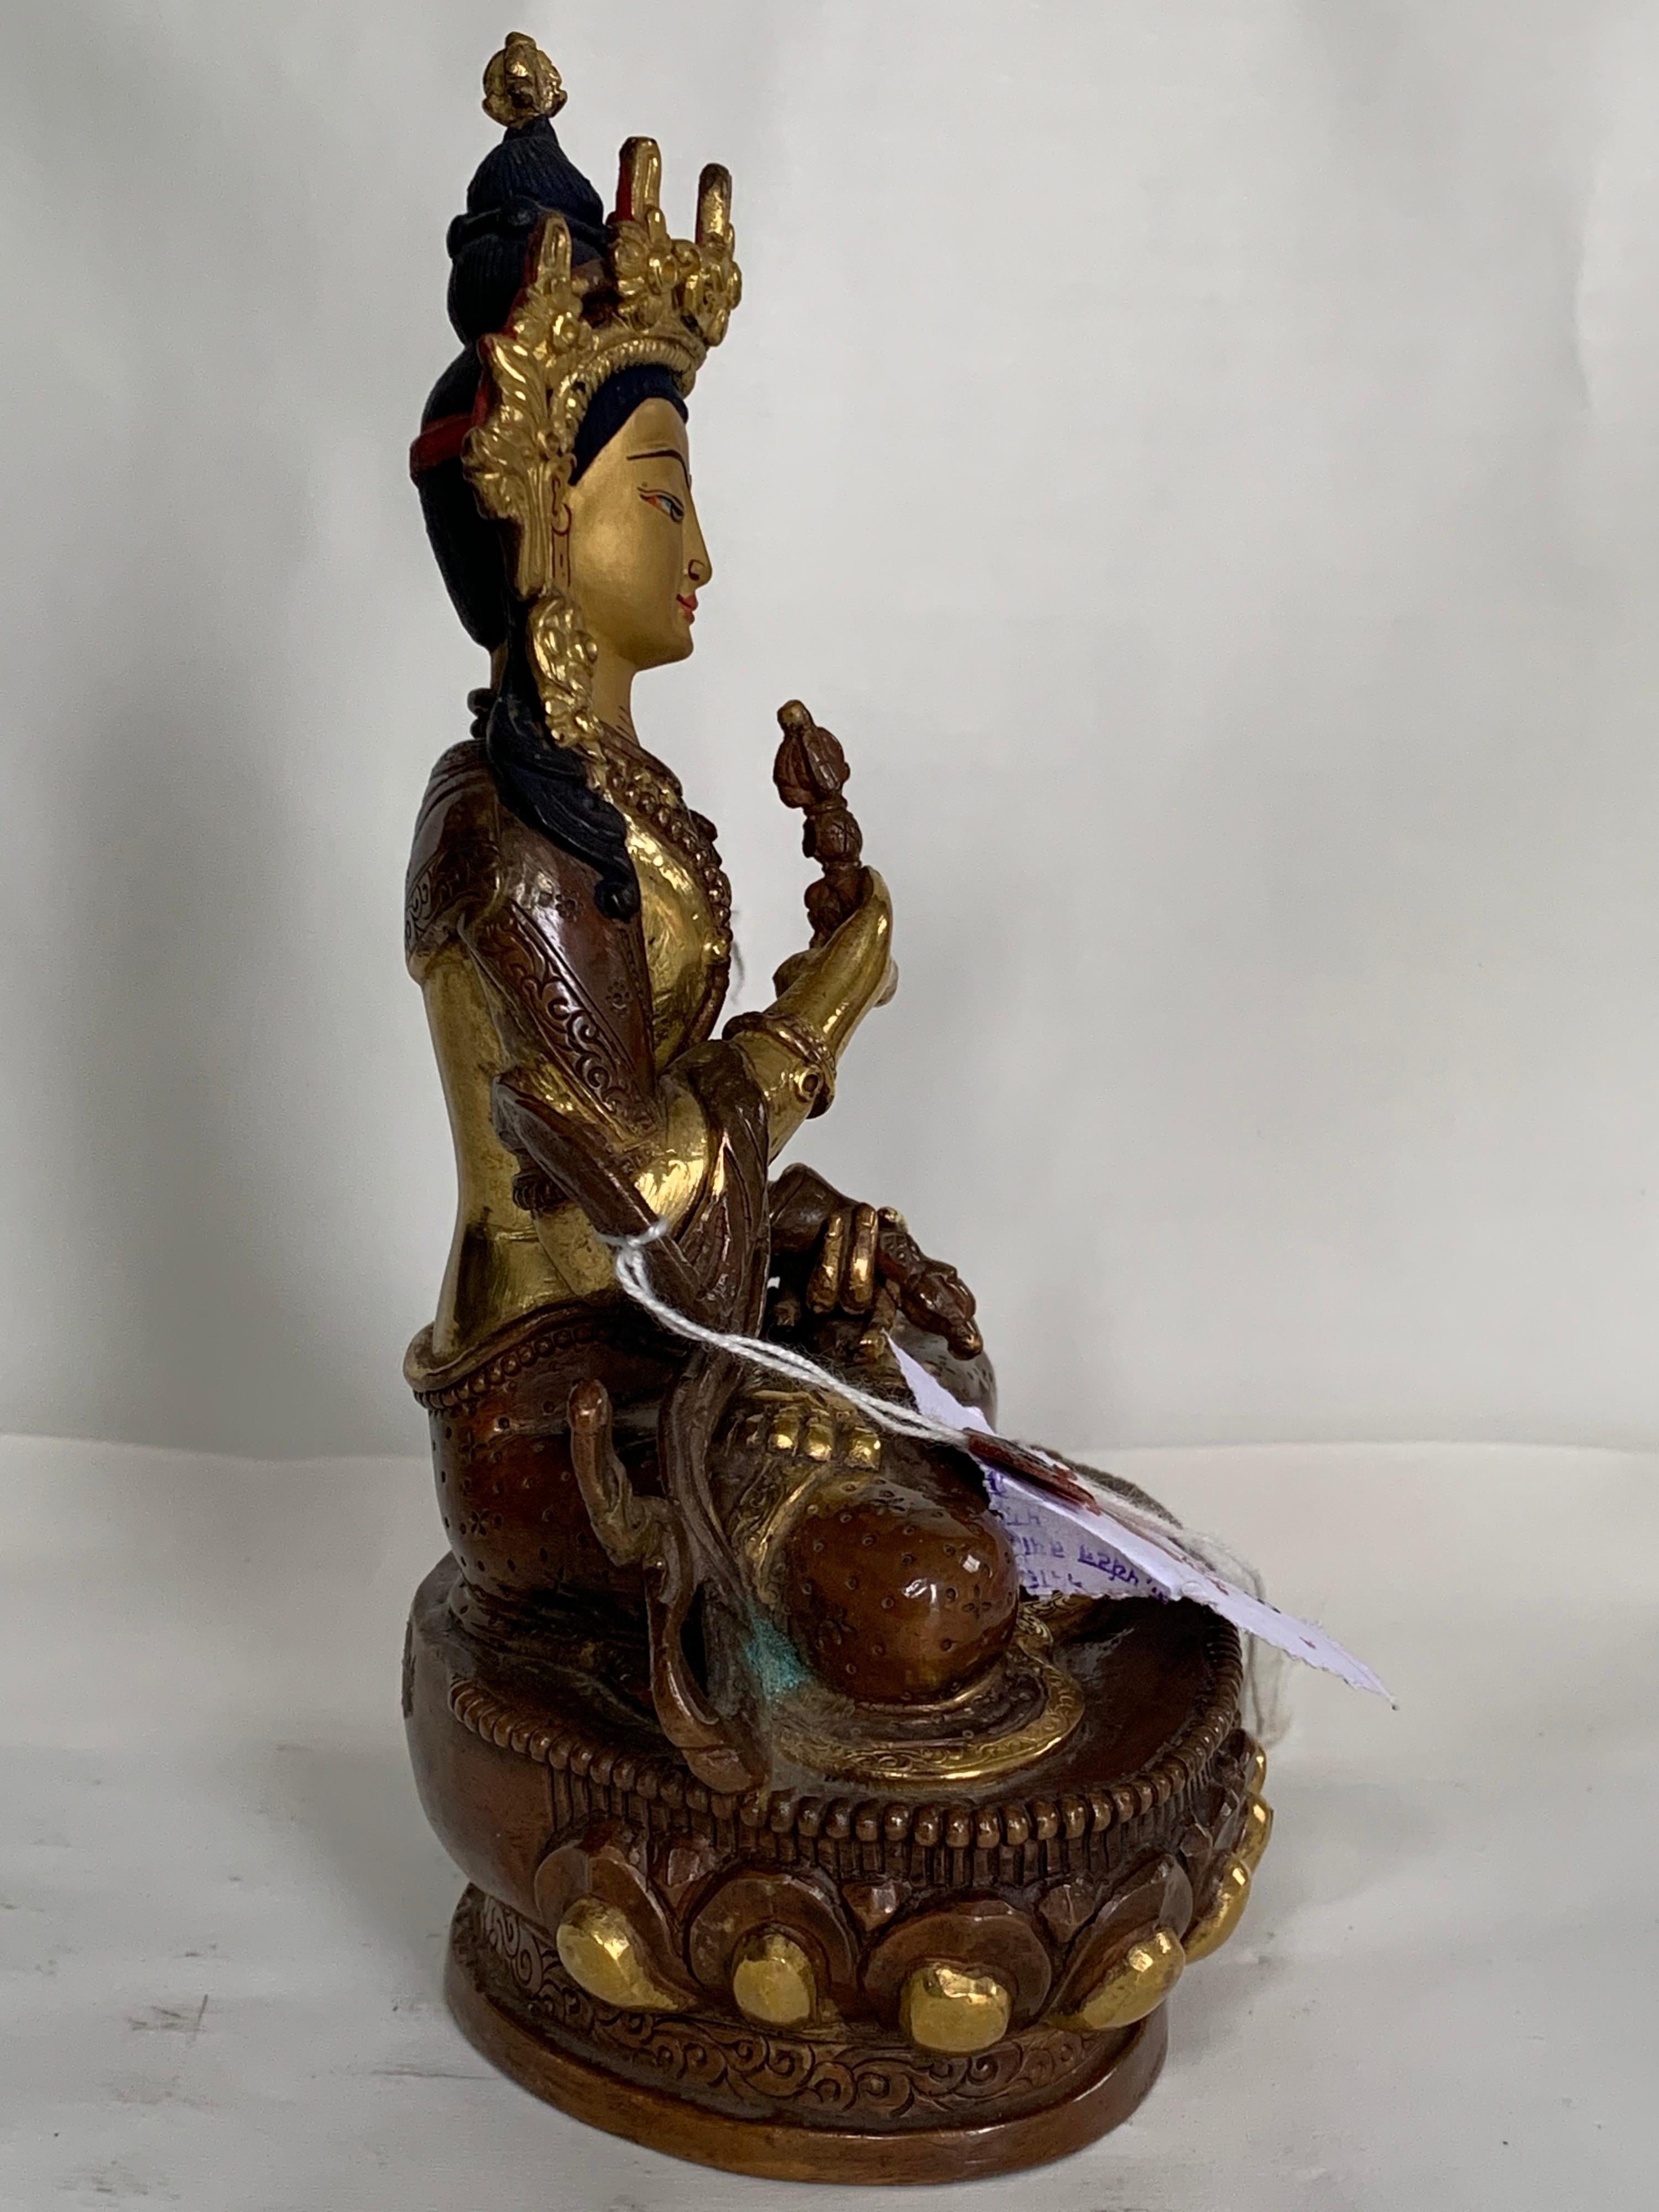 Vajrasattva Statue 7.5 Inch with 24K Gold Handcrafted by Lost Wax Process - Gray Figurative Sculpture by Unknown